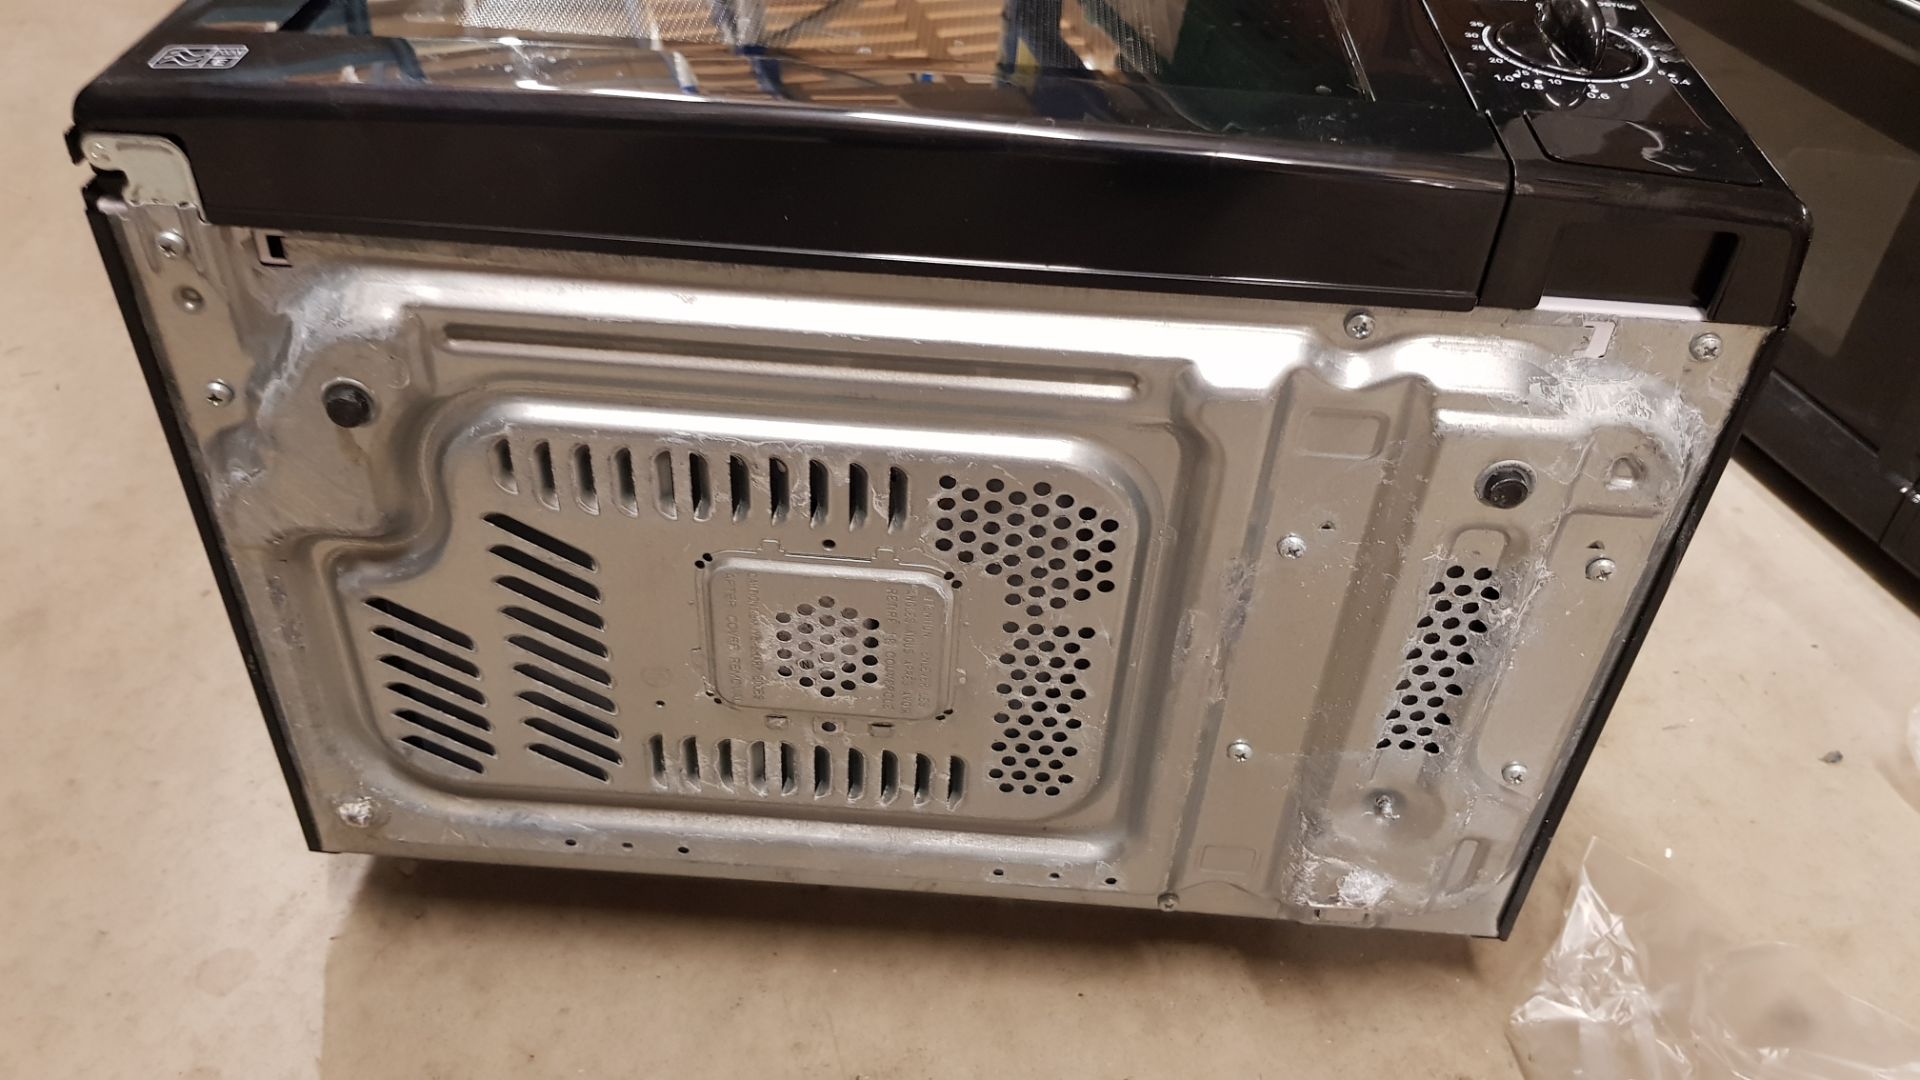 2x Microwave Oven Black 700W 17L (GMM001NB-18) RRP £60 Each. (Spares Or Repairs). - Image 5 of 8